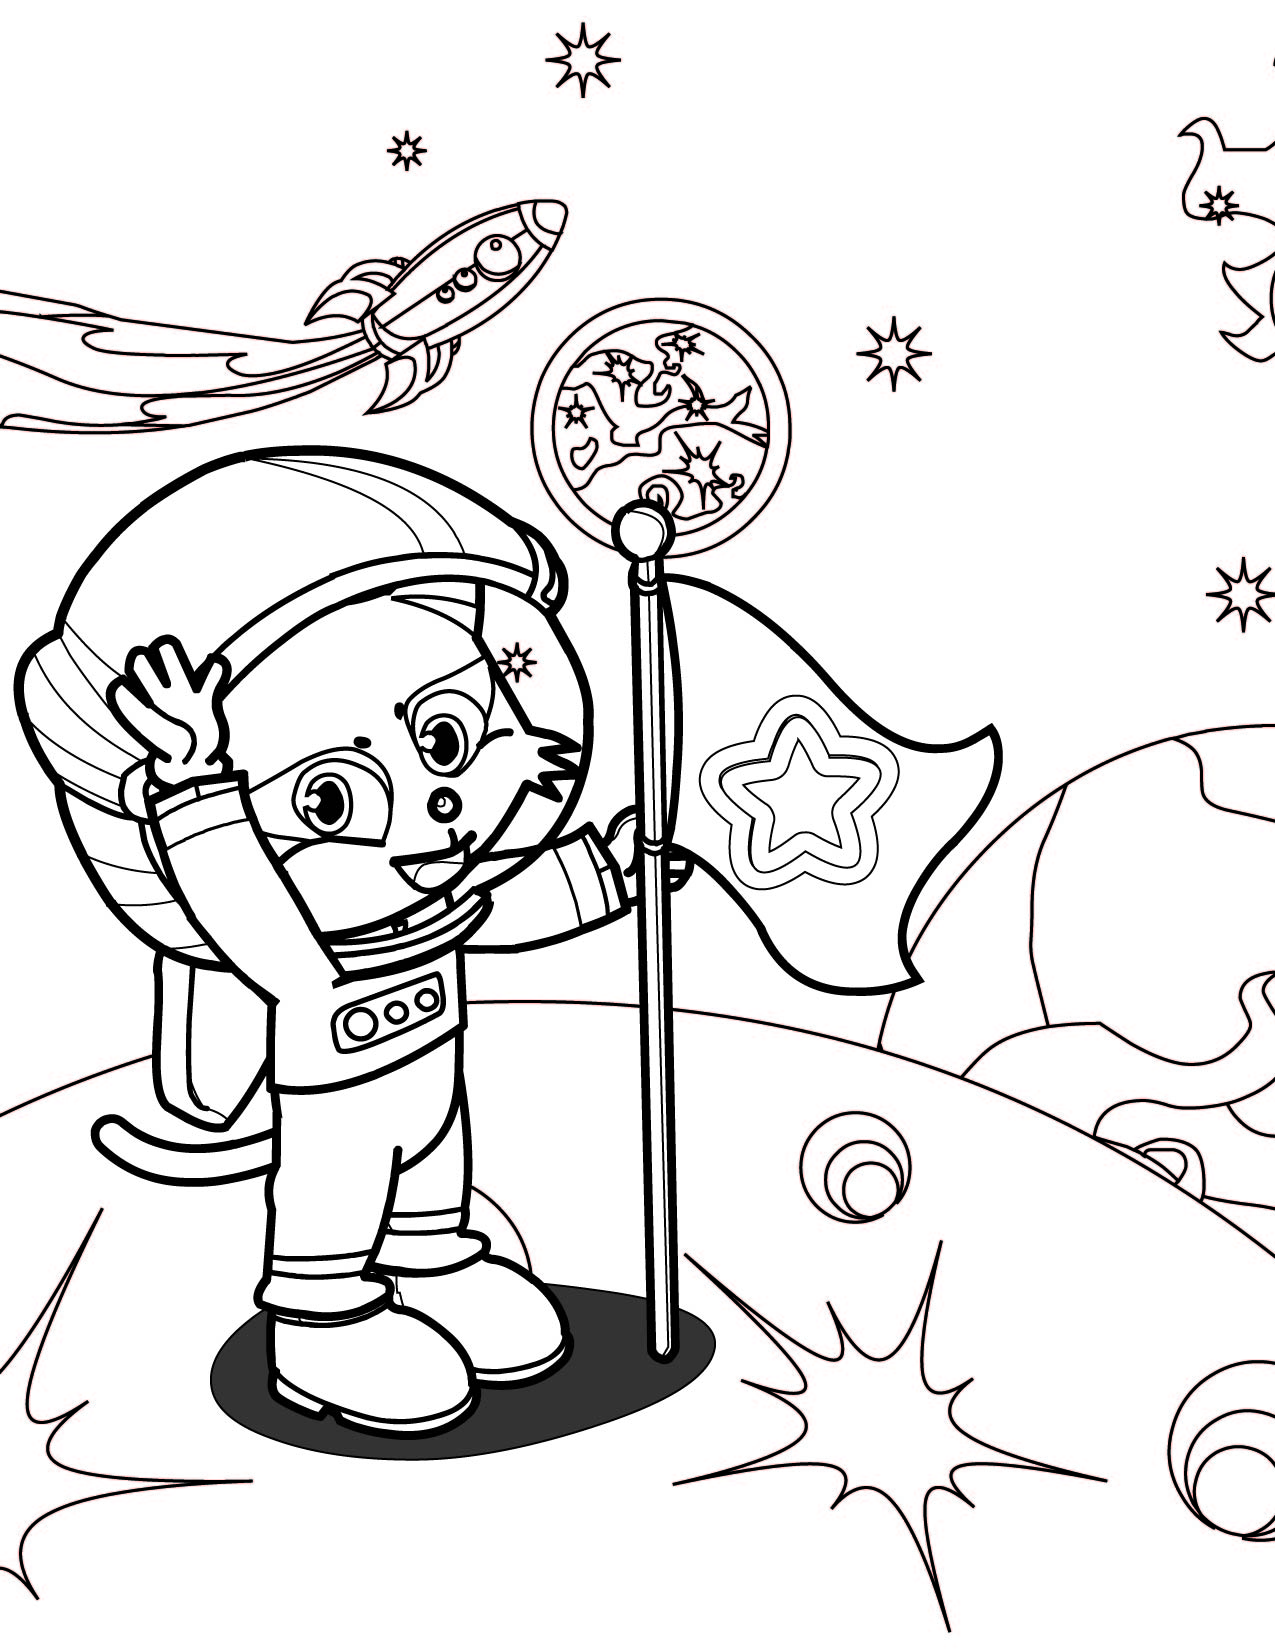 Astronaut For Kids Coloring Pages